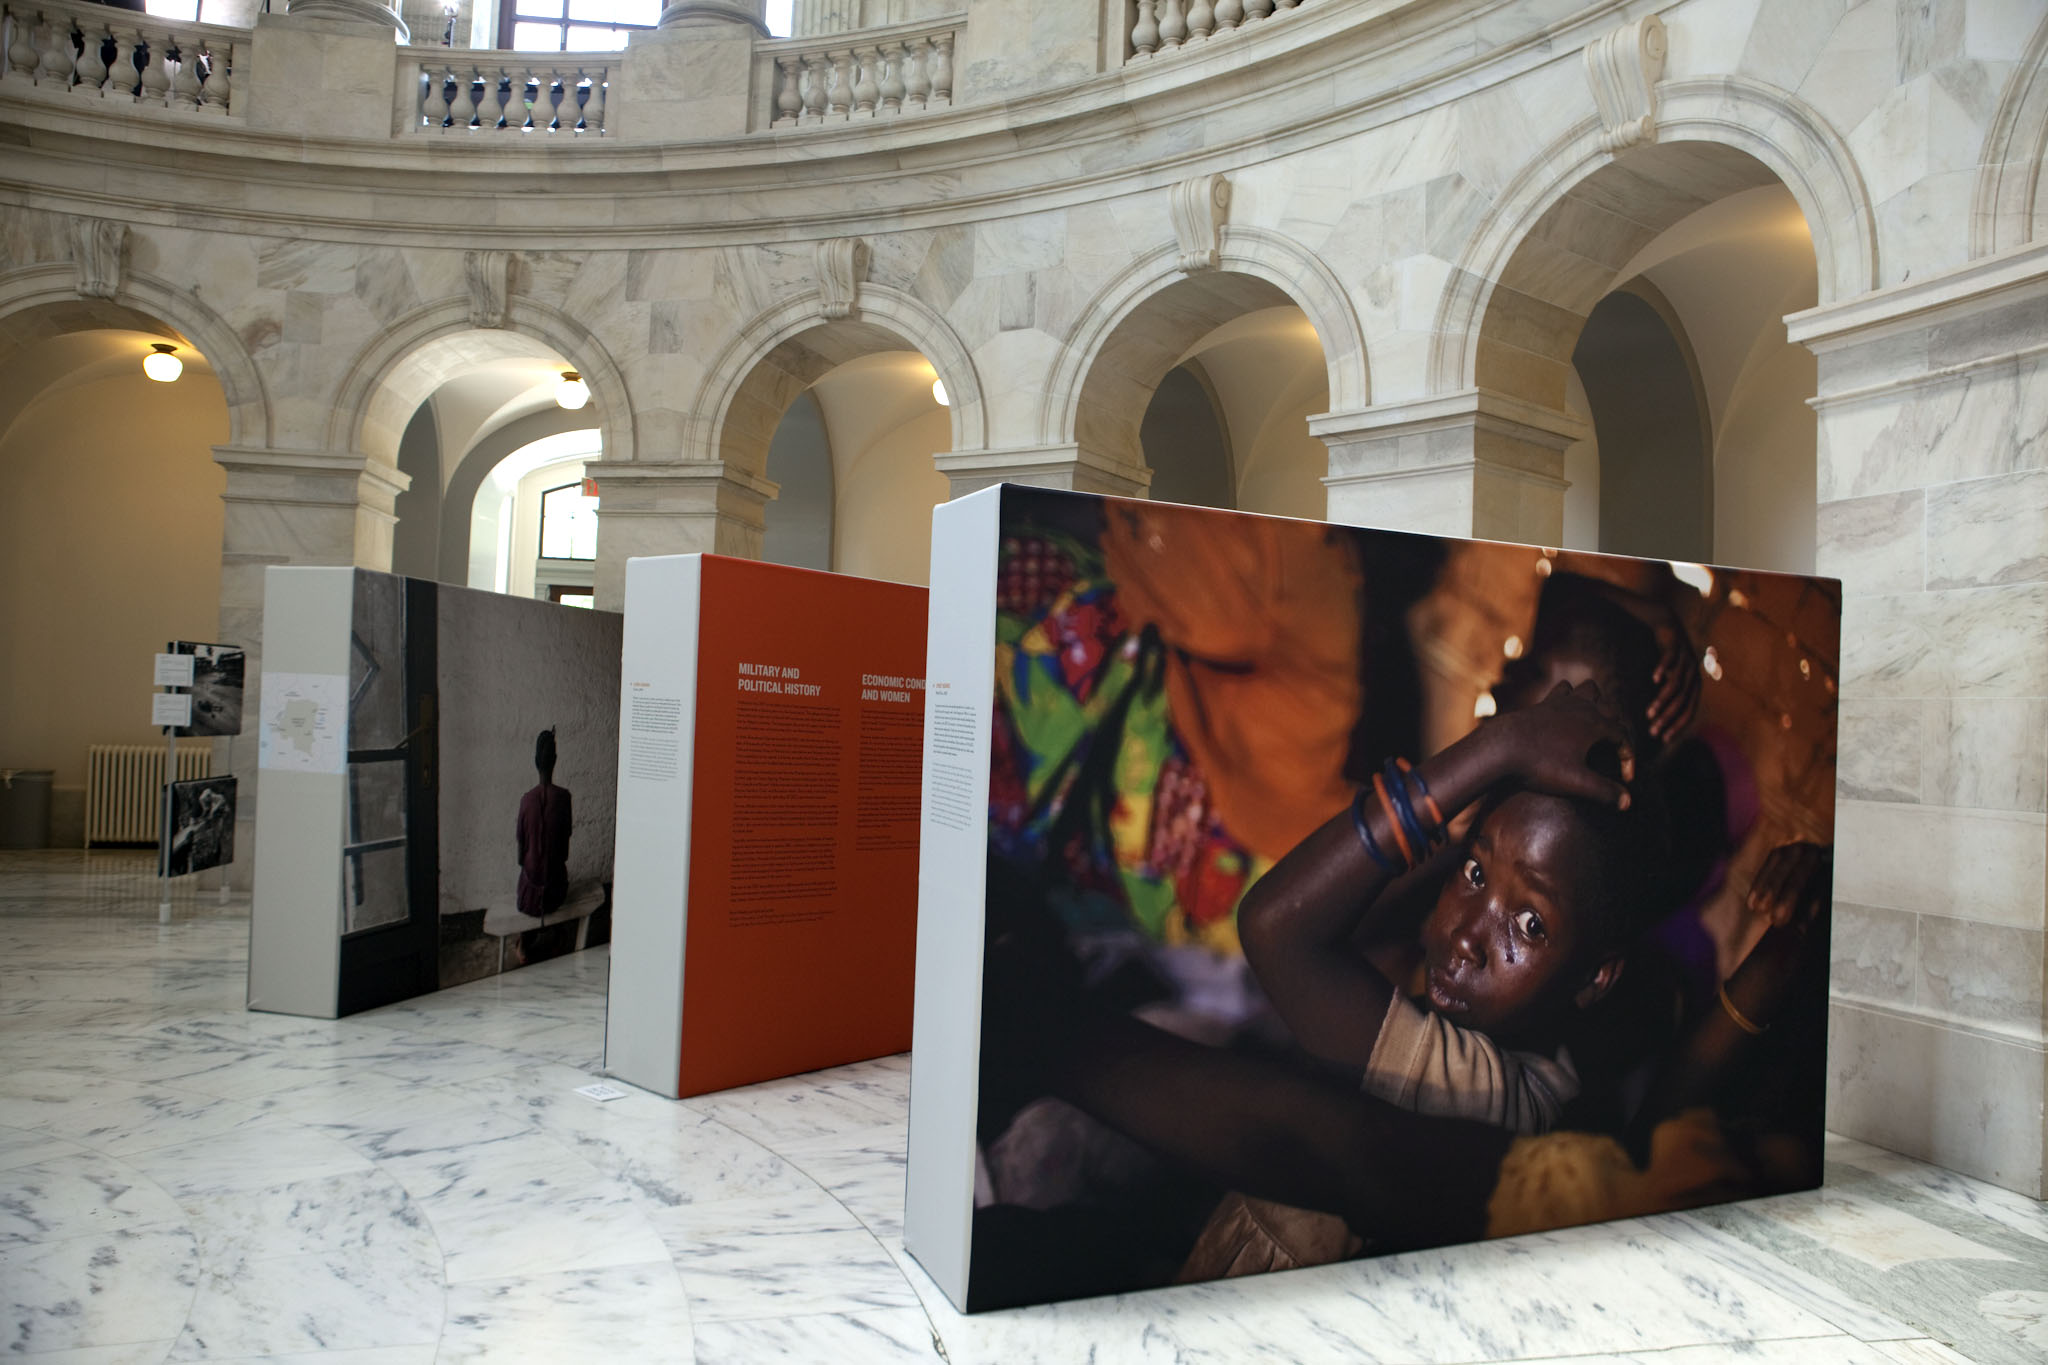 Congo Women show by Addario, Bleasdale, Haviv, Nachtwey at the Russell Senate building.